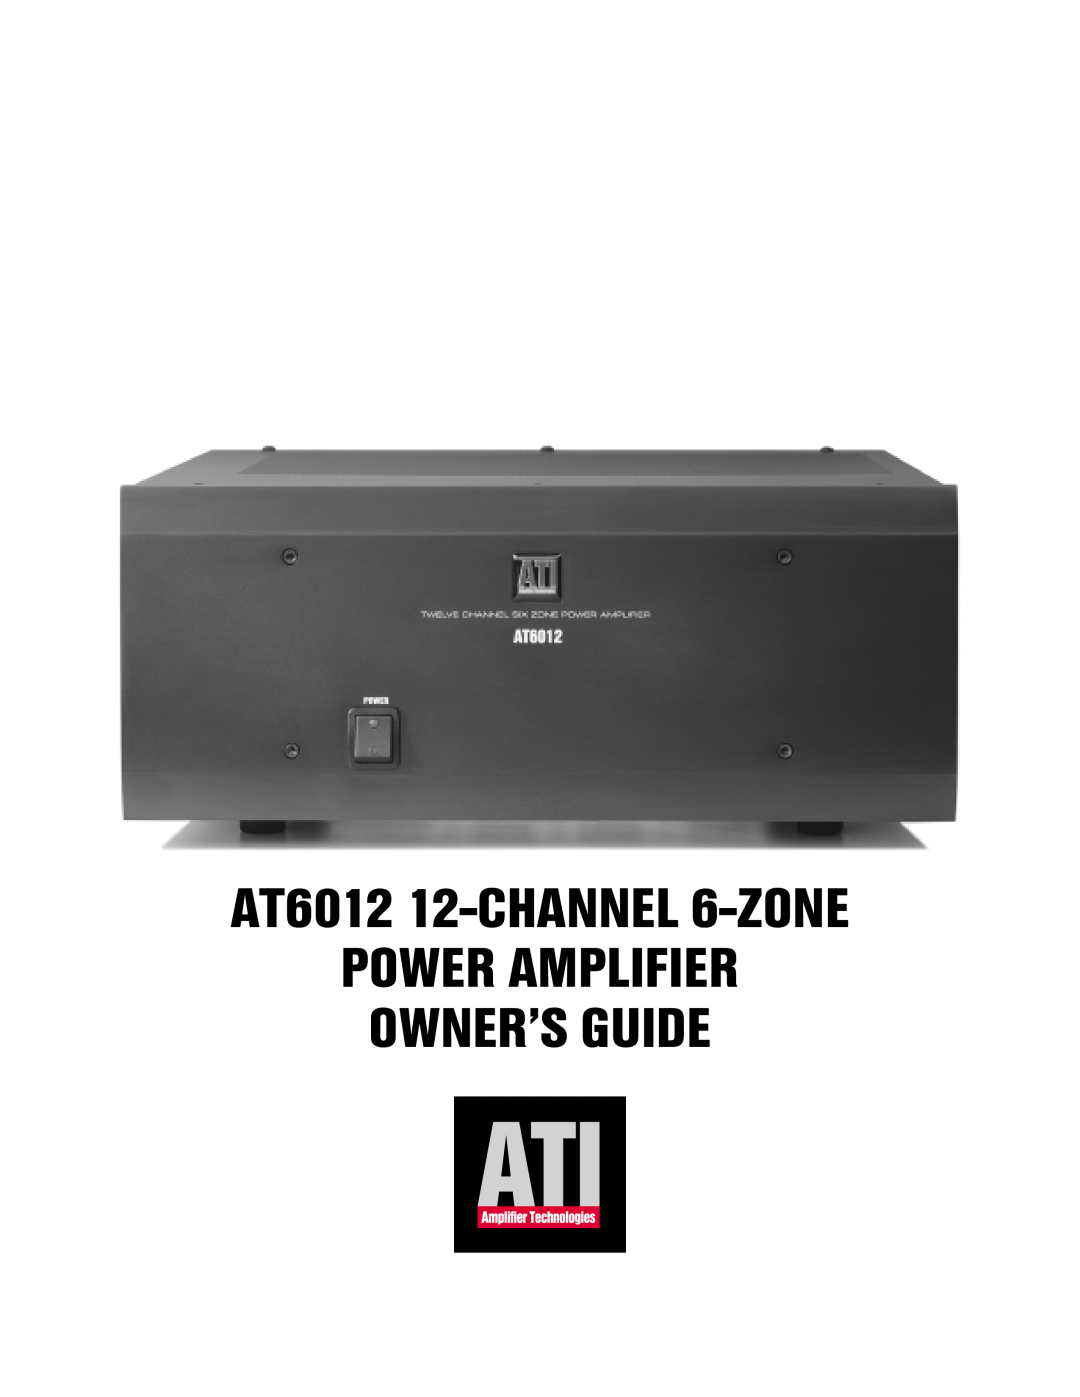 Amplifier Tech manual AT6012 12-CHANNEL 6-ZONE POWER AMPLIFIER, Owner’S Guide 